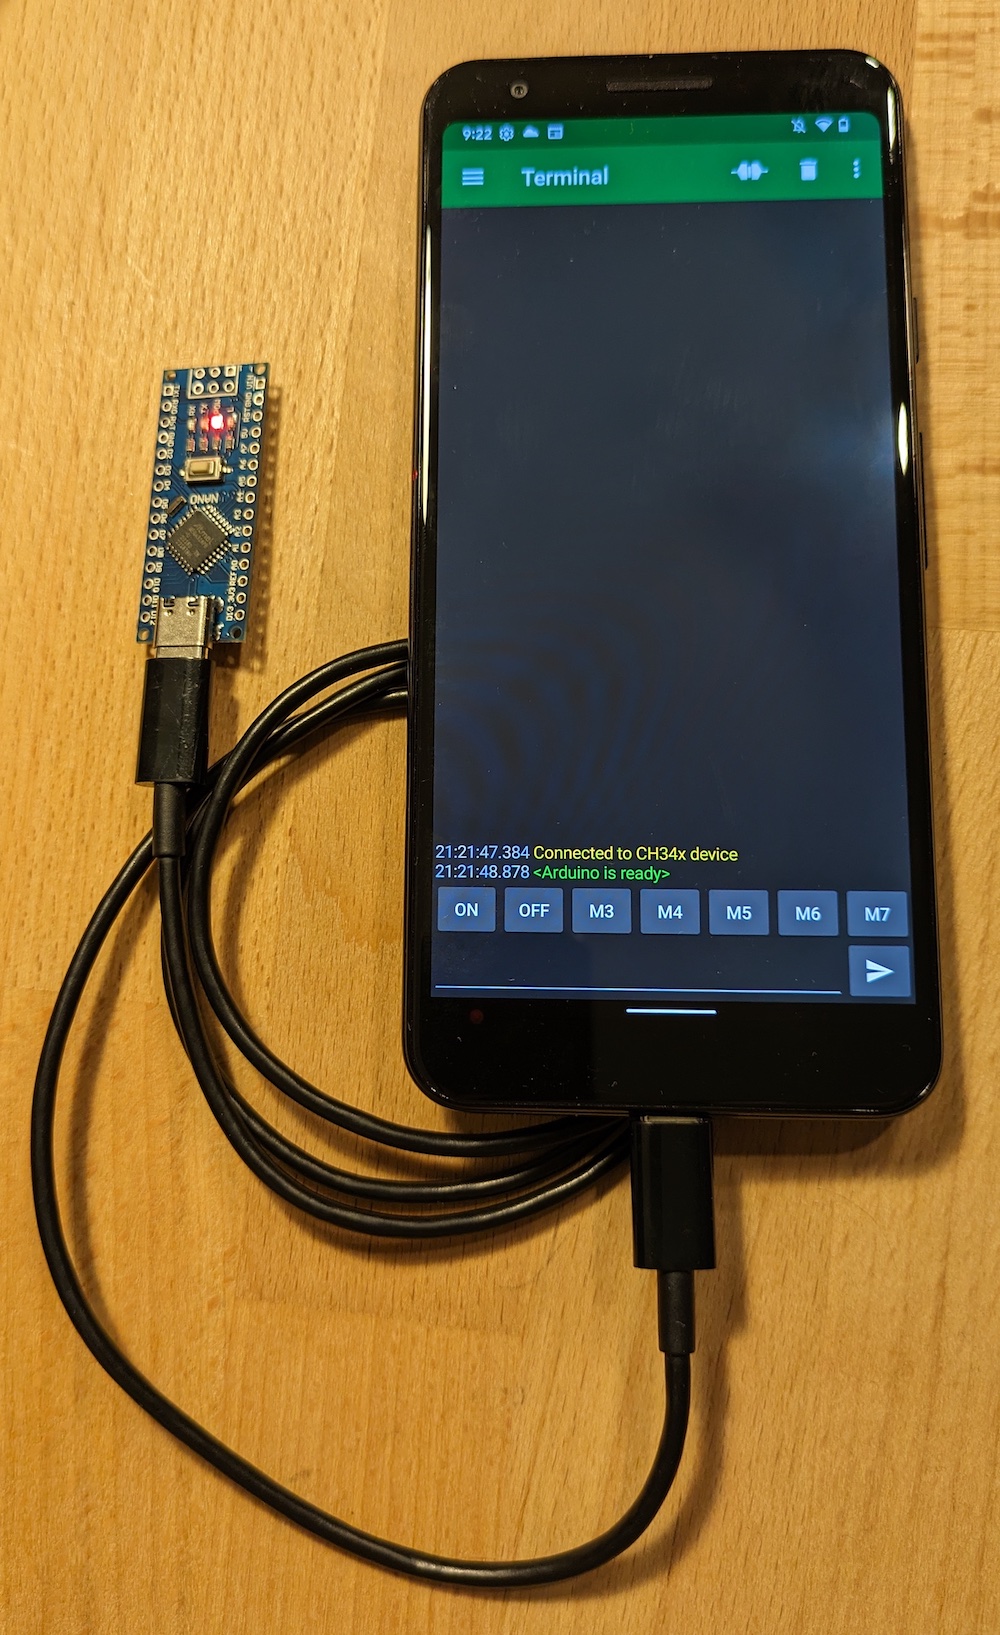 An Android phone with an _Arduino Nano_ connected to its USB port.